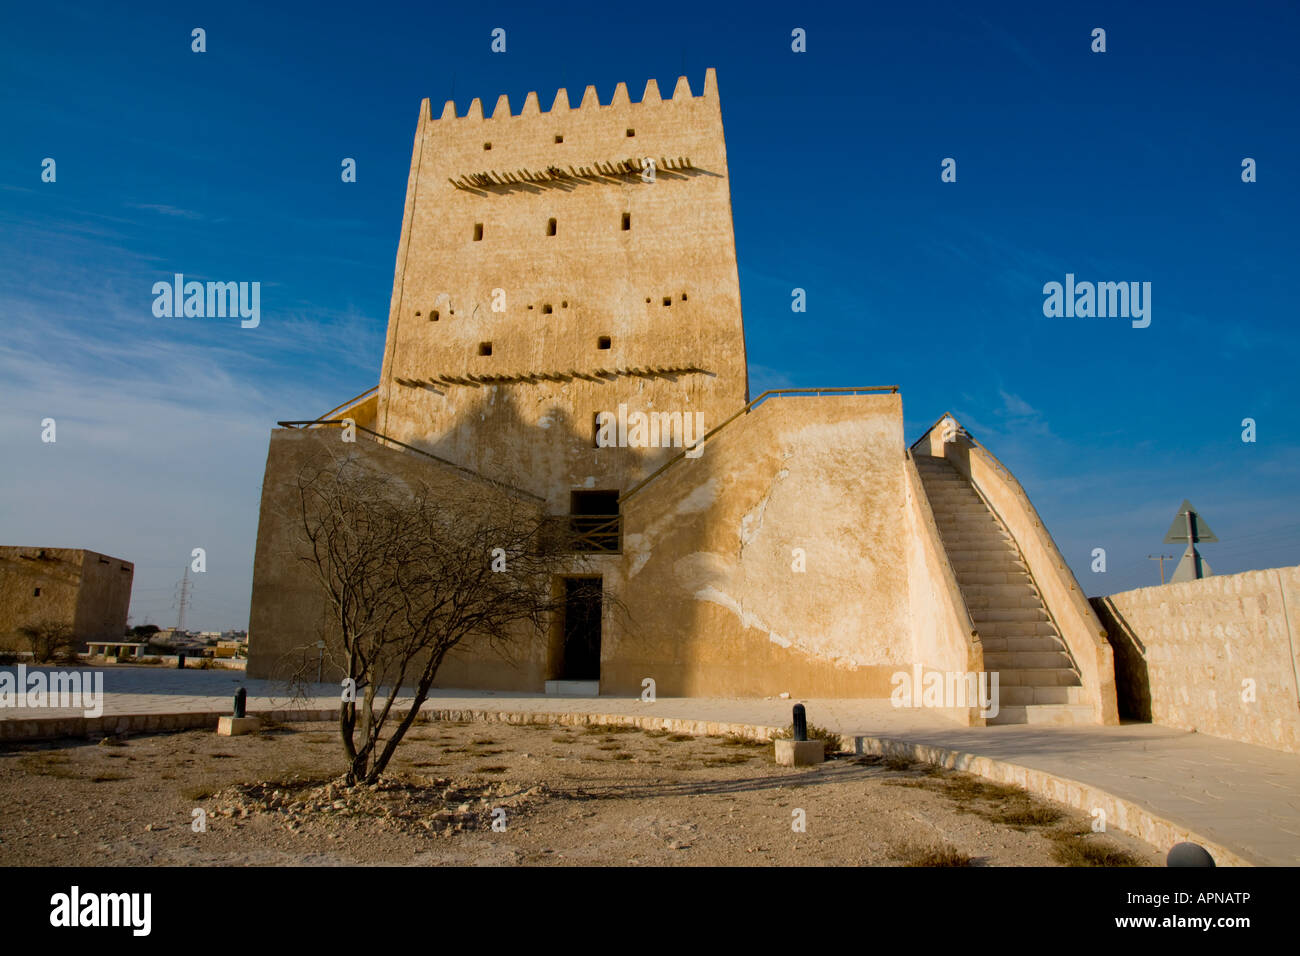 Middle east Qatar Umm Salal Mohammed fort Stock Photo